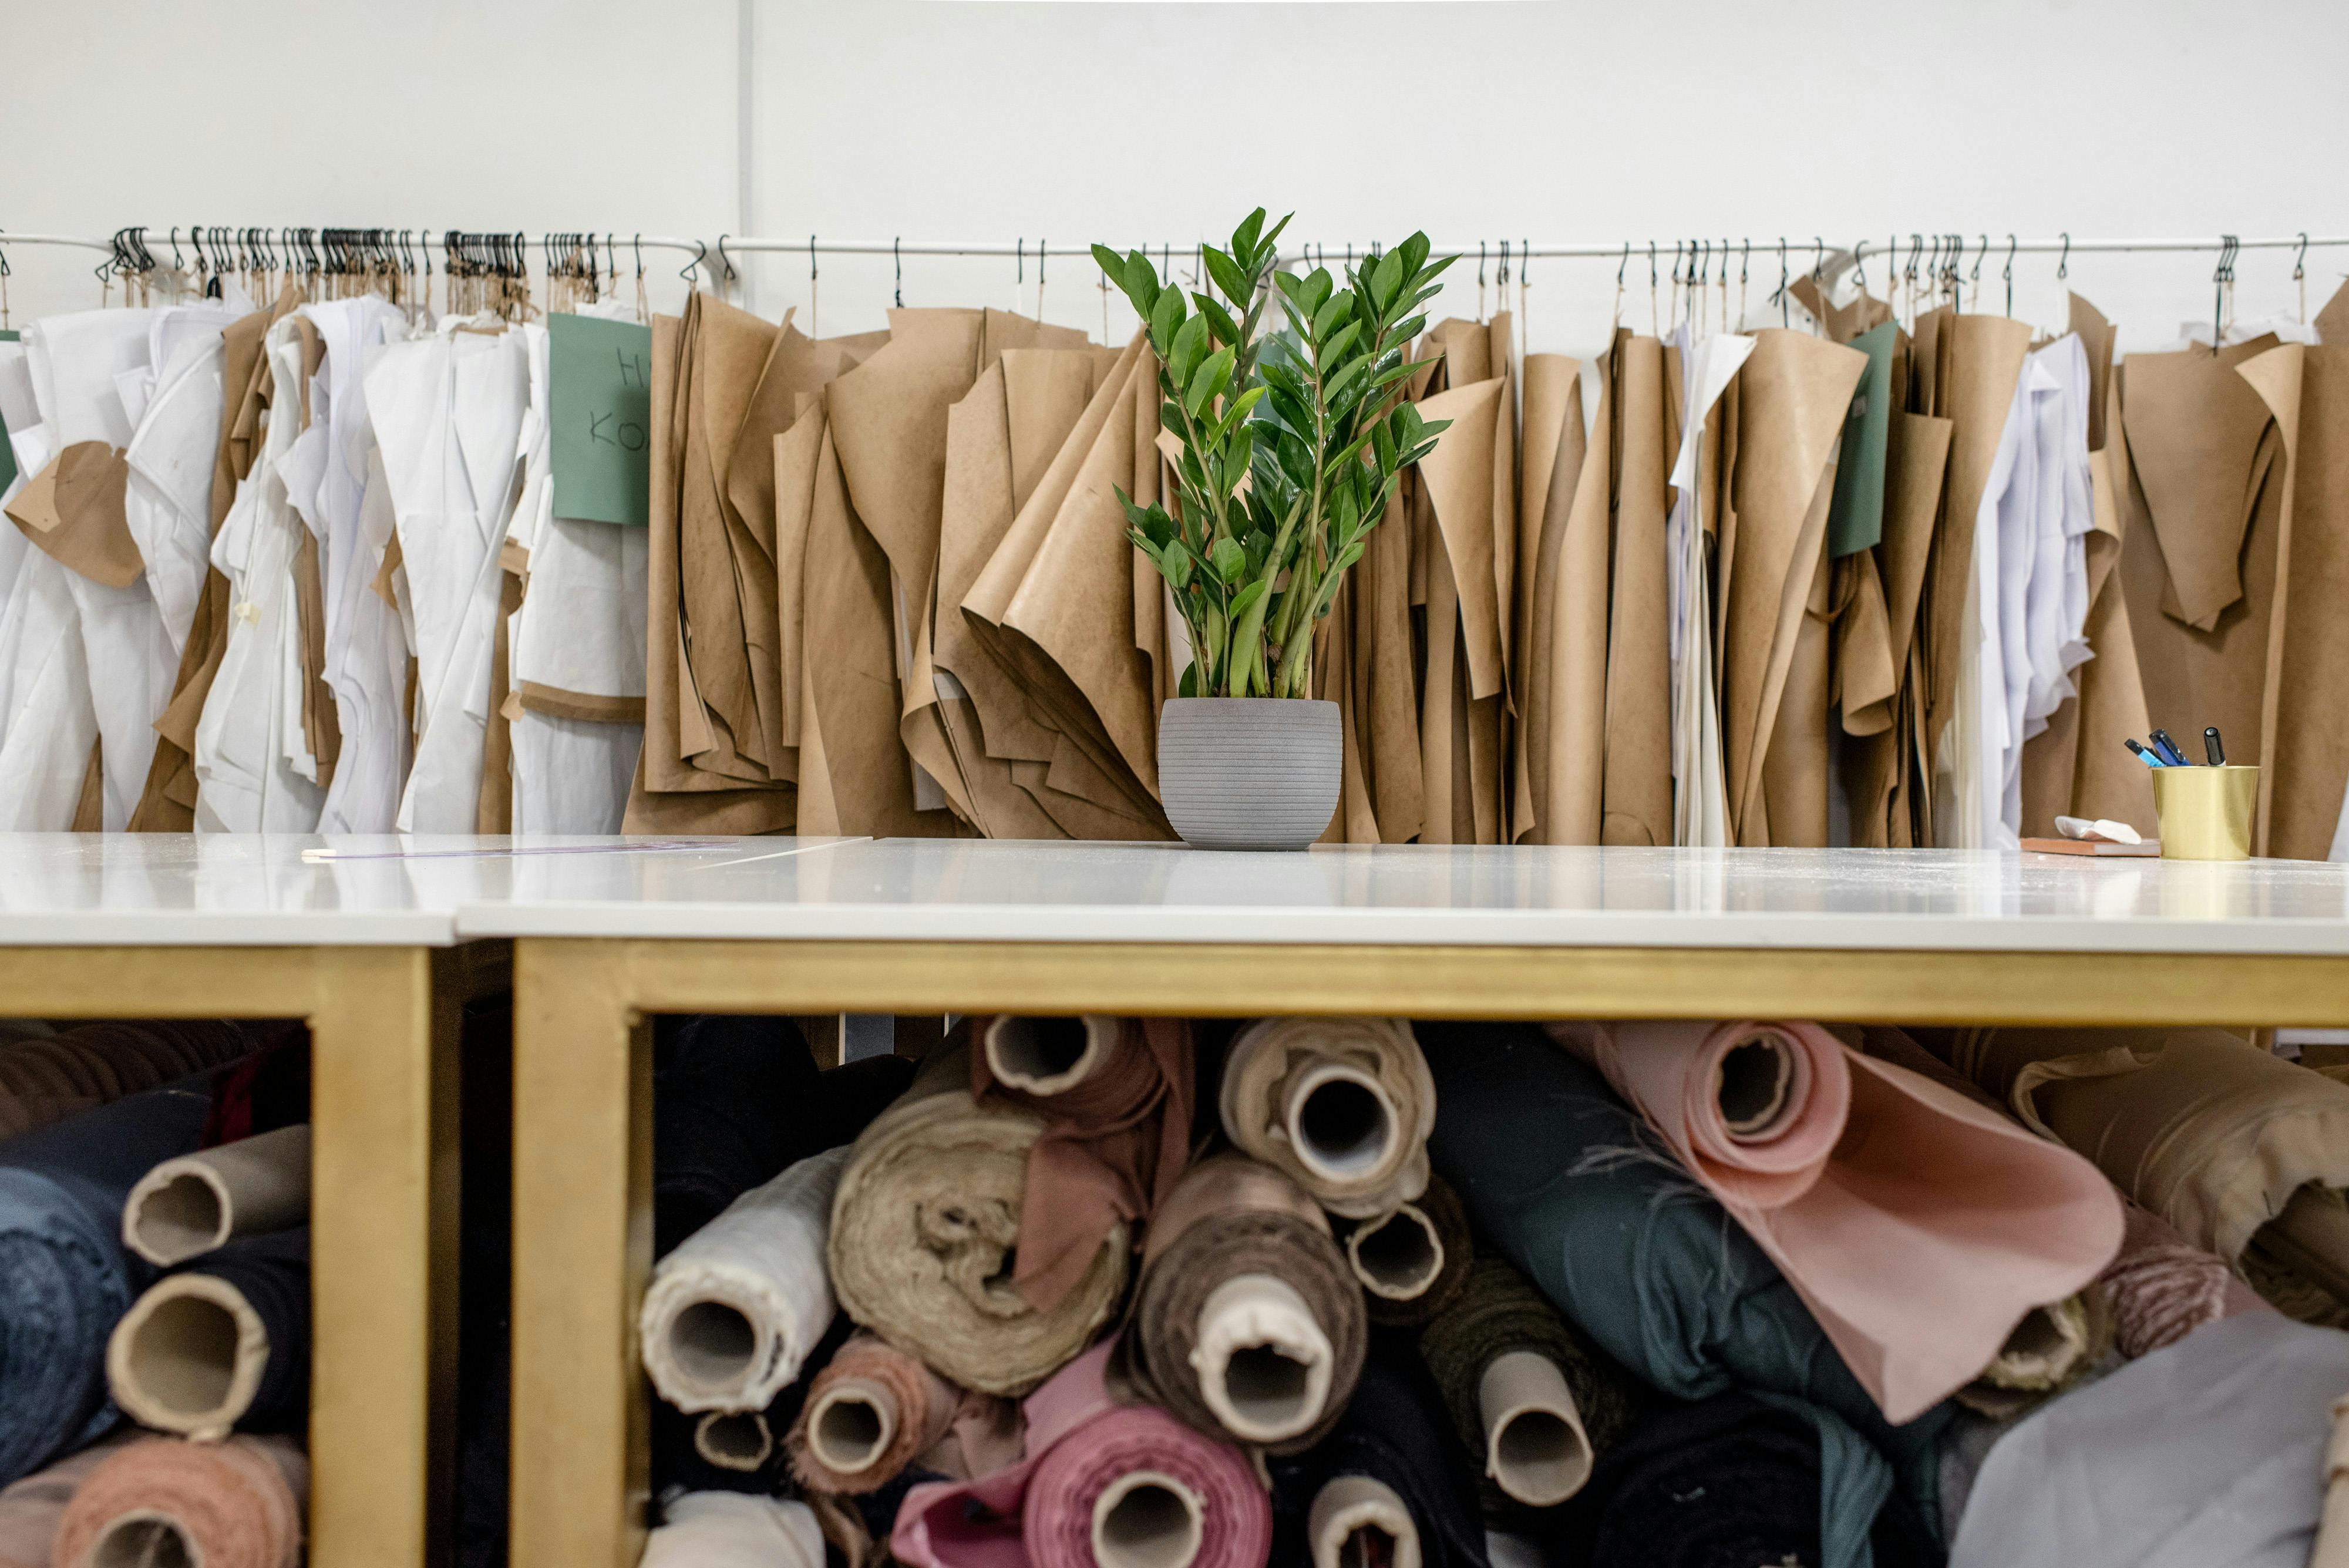 A fabric store | Source: Pexels